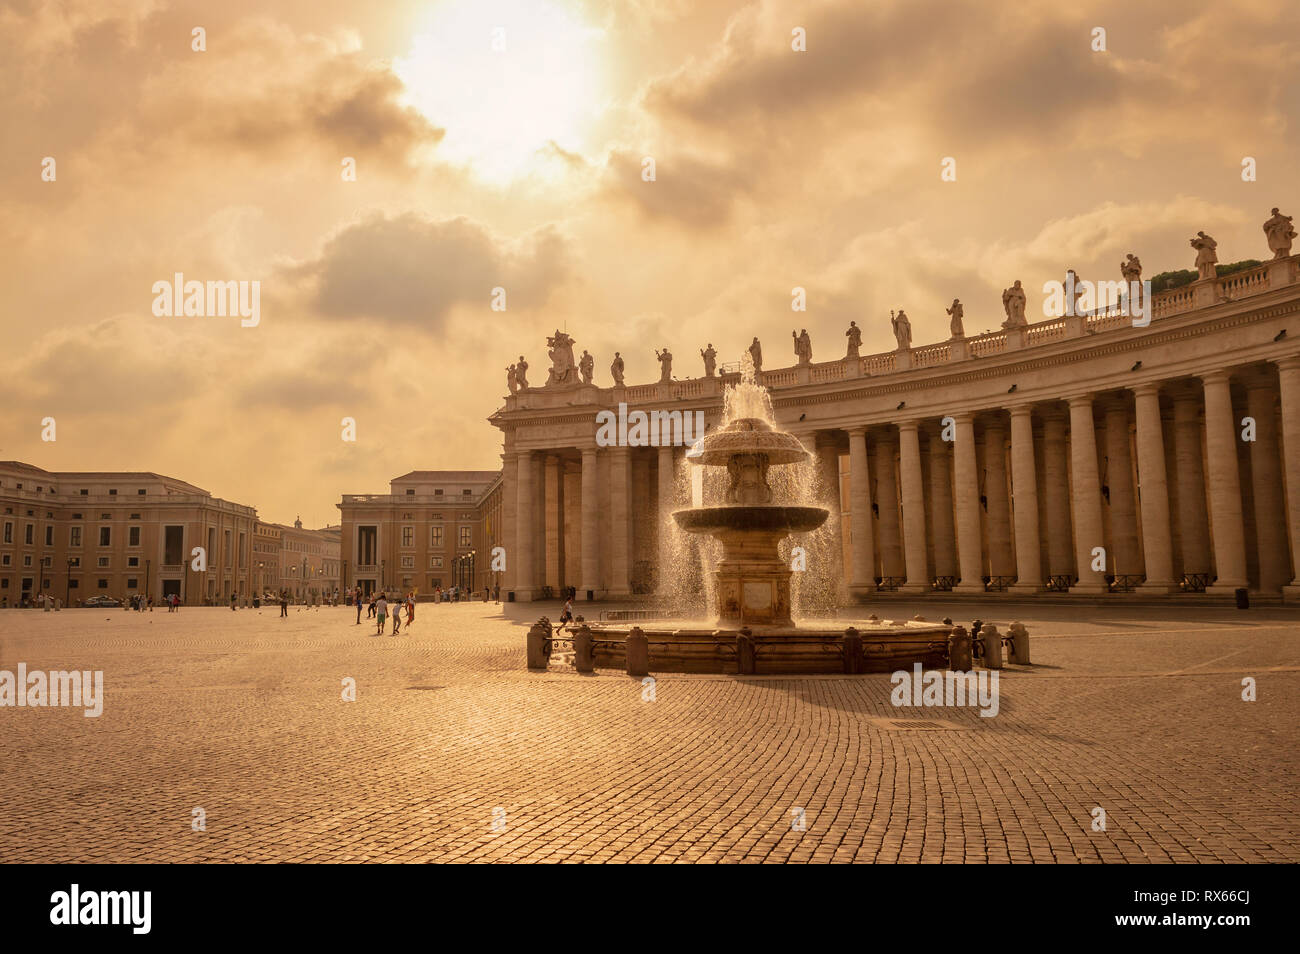 Saint Peter's basilica in St Peter's square in Vatican, Rome Italy Stock Photo